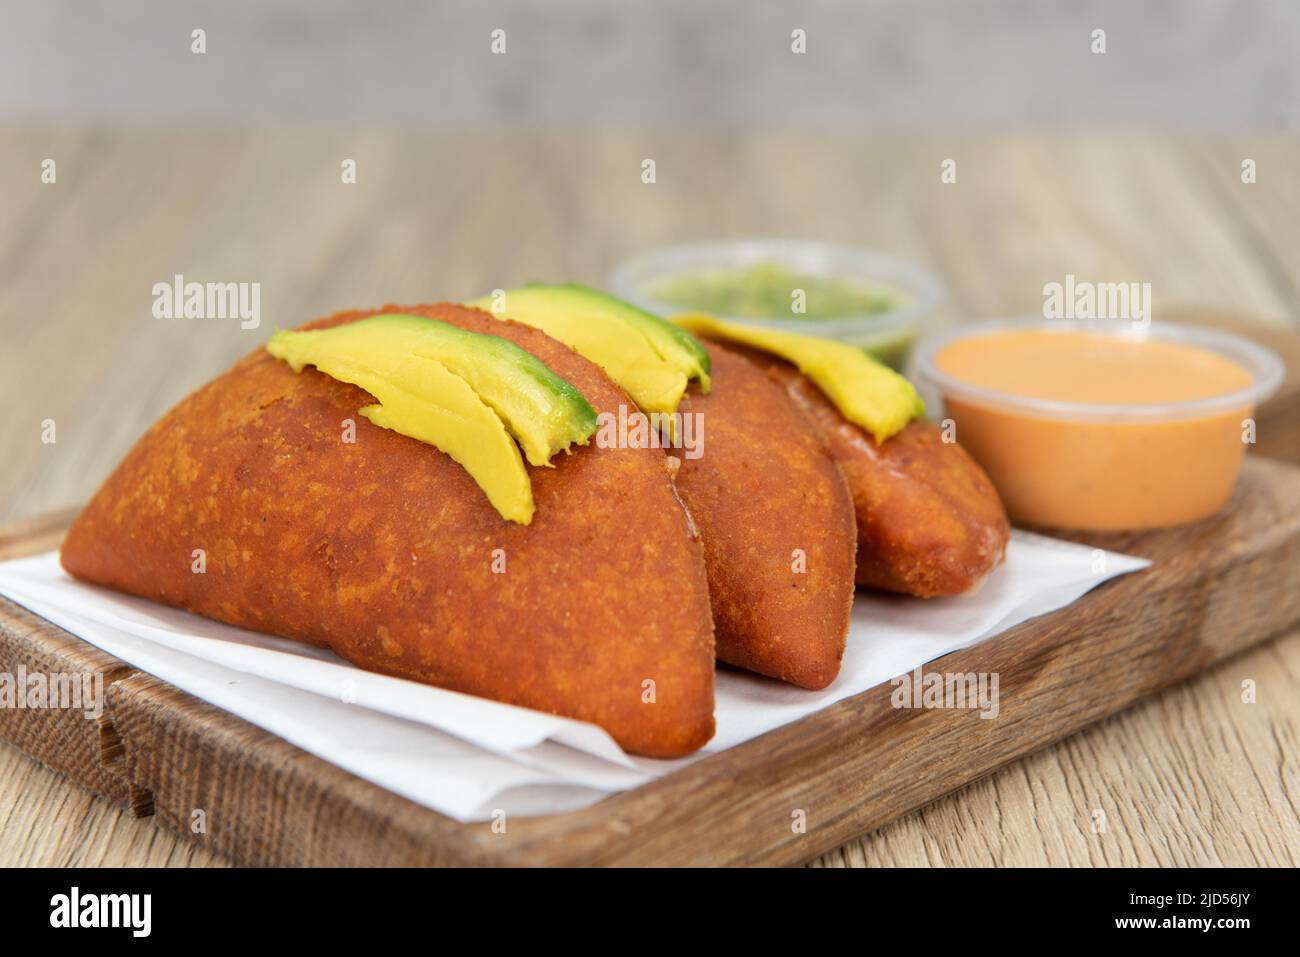 Appetizing breaded empandas on a decorative cutting board, for a tempting Mexican food delicacy. Stock Photo